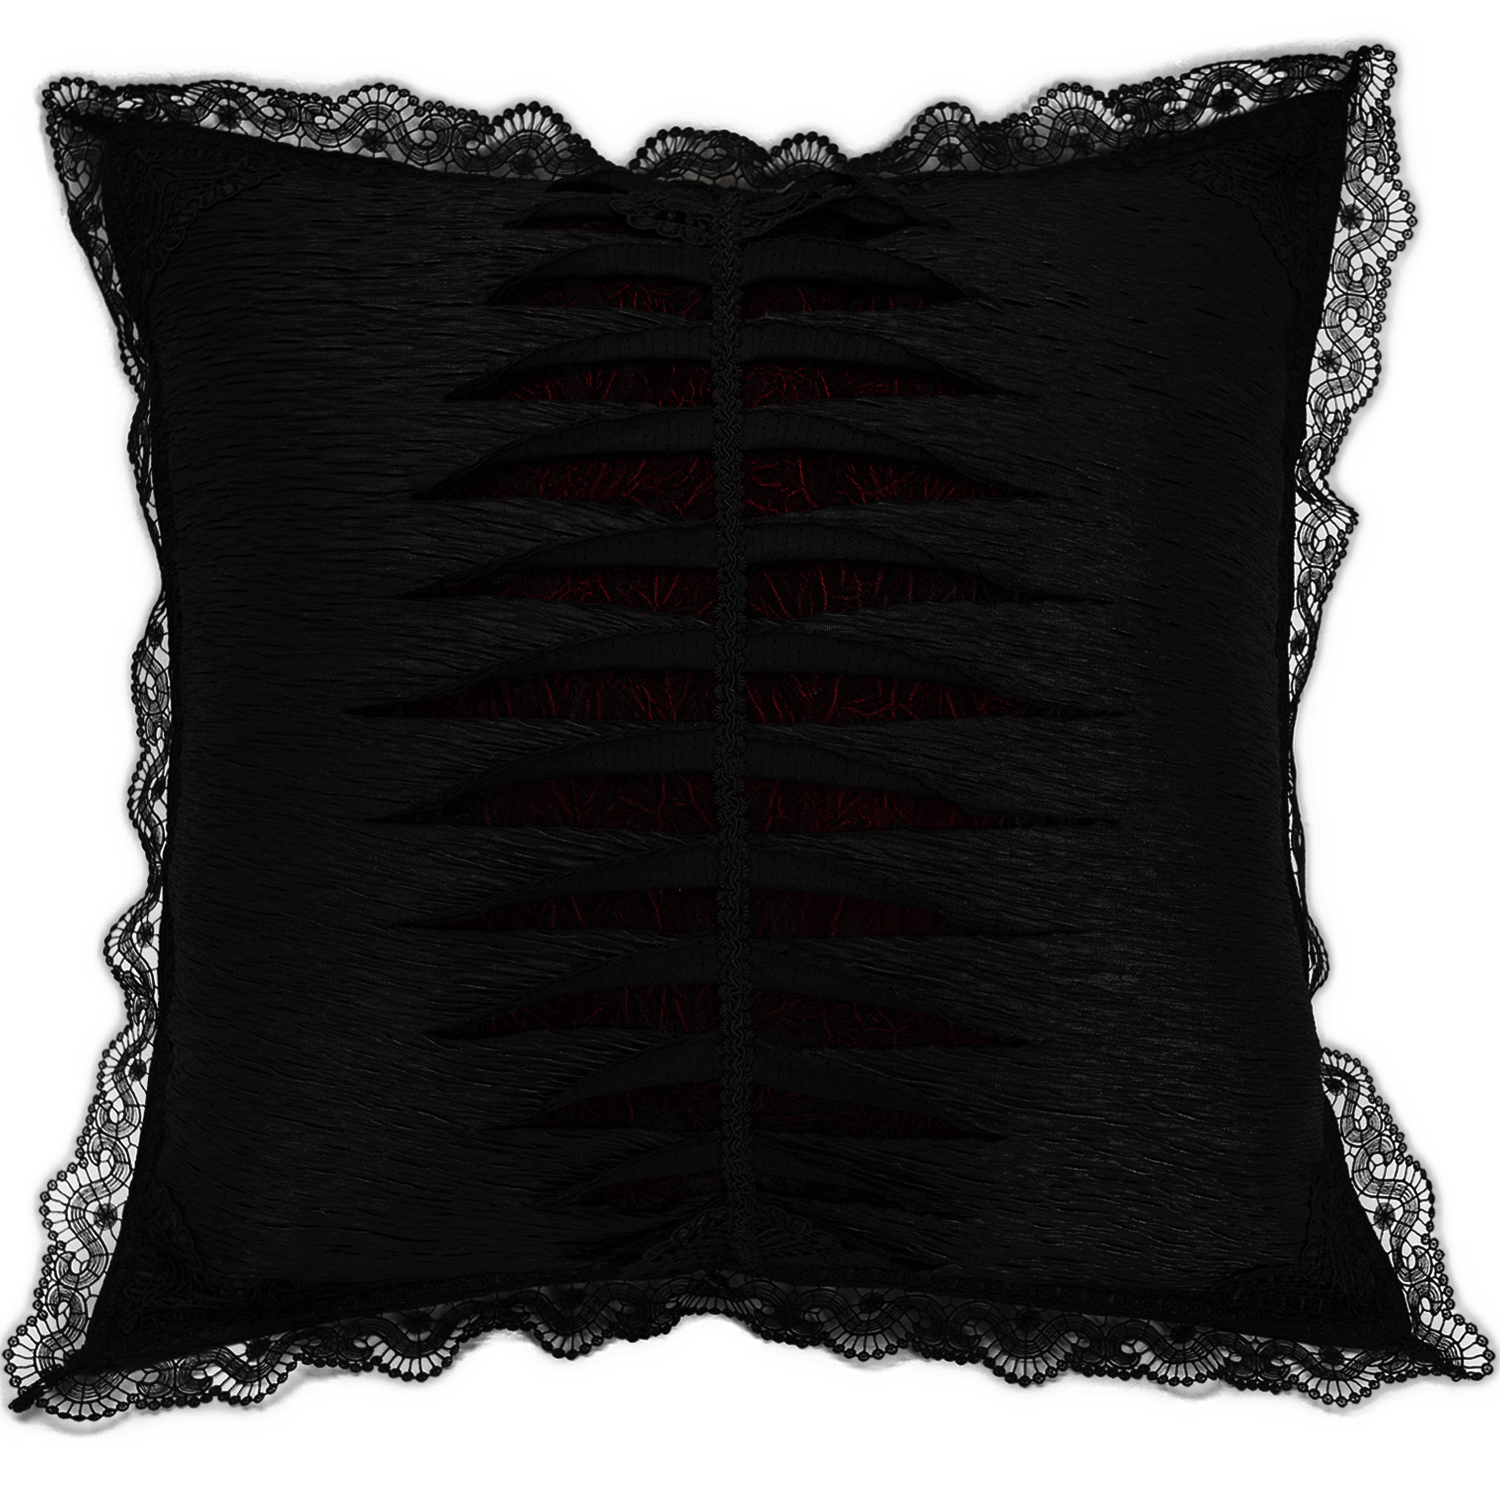 https://www.thedarkstore.com/21436/black-and-red-ribcage-decorative-cushion.jpg